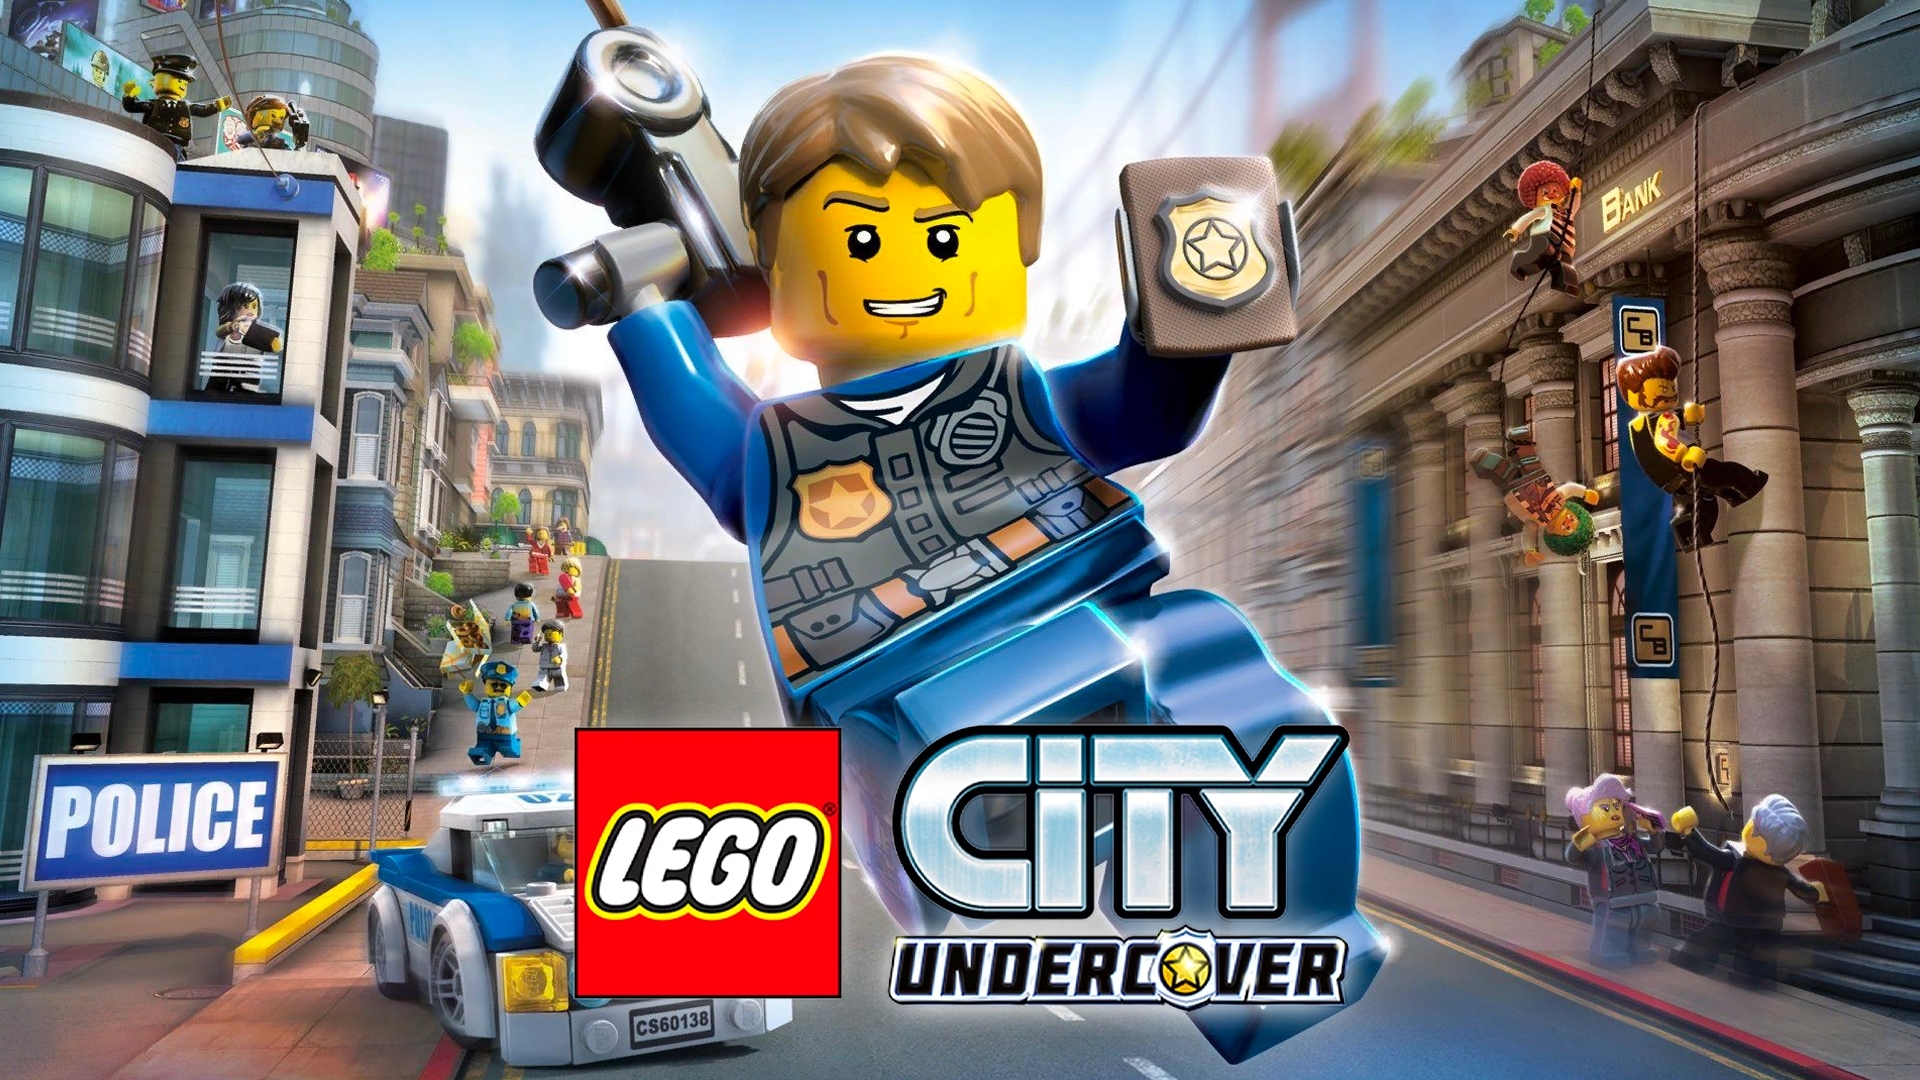 NEW - SWITCH - LEGO City Undercover (Nintendo Switch, 2017, Game Download